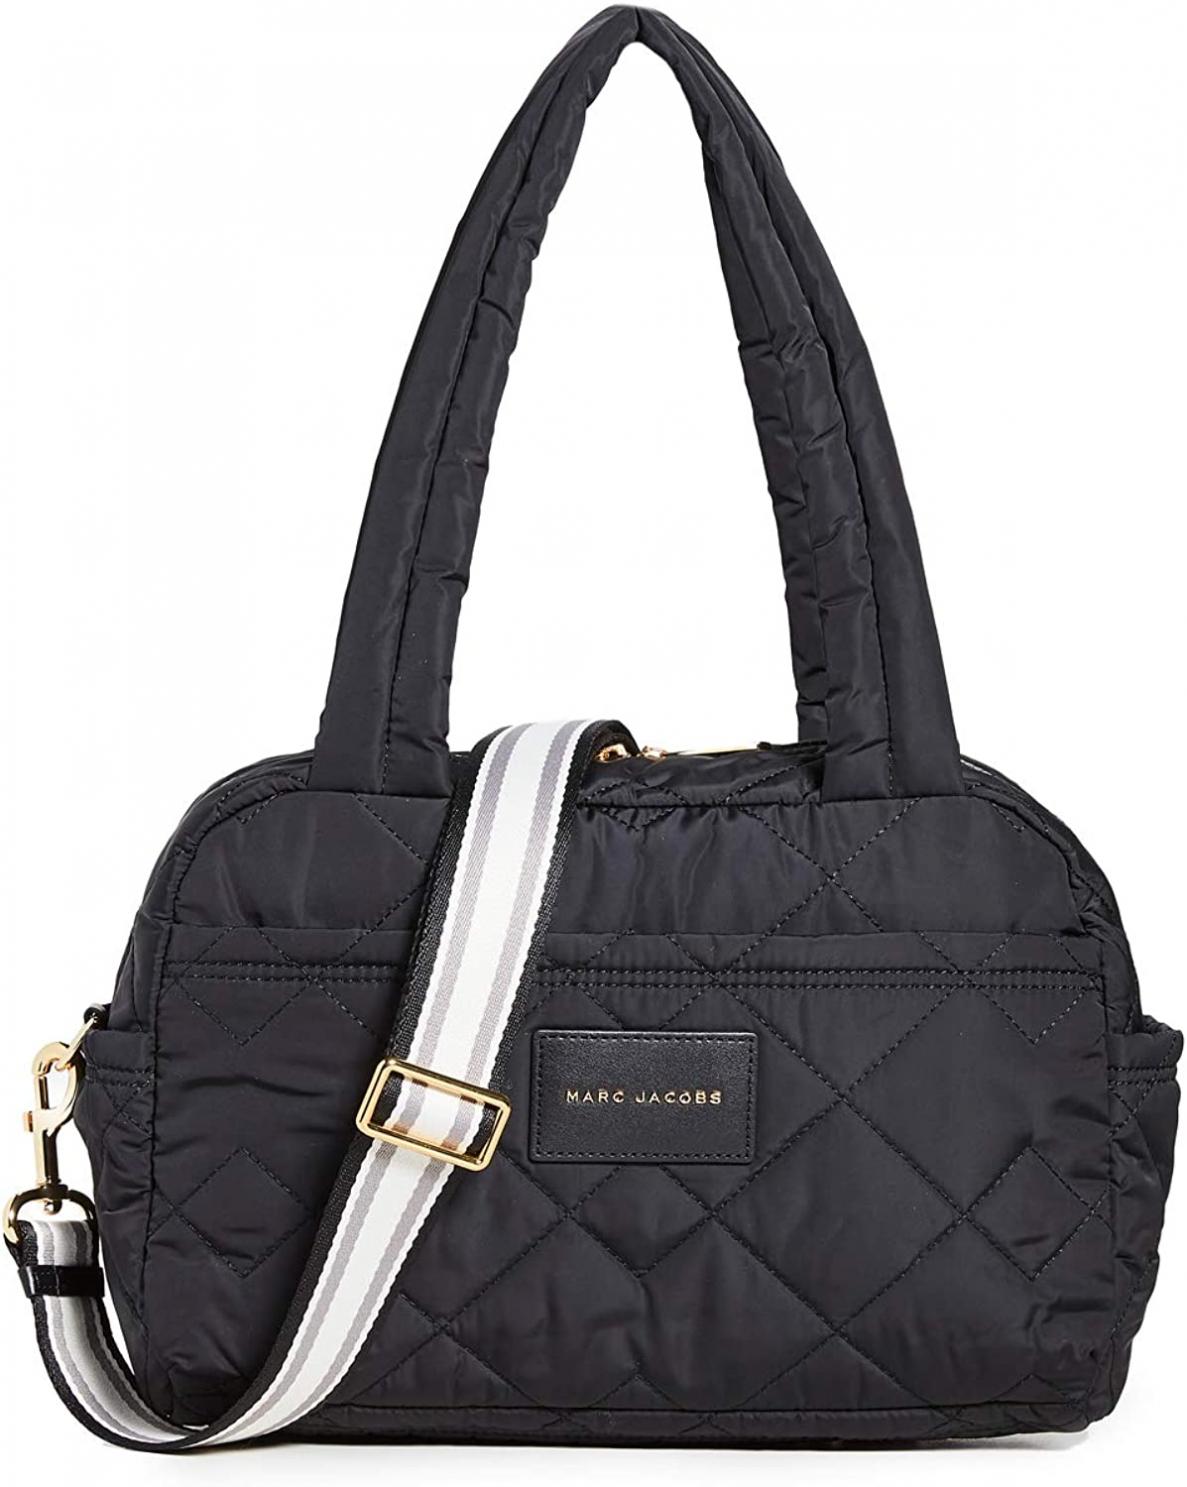 Marc Jacobs Women's Small Weekender Bag, Black, One Size